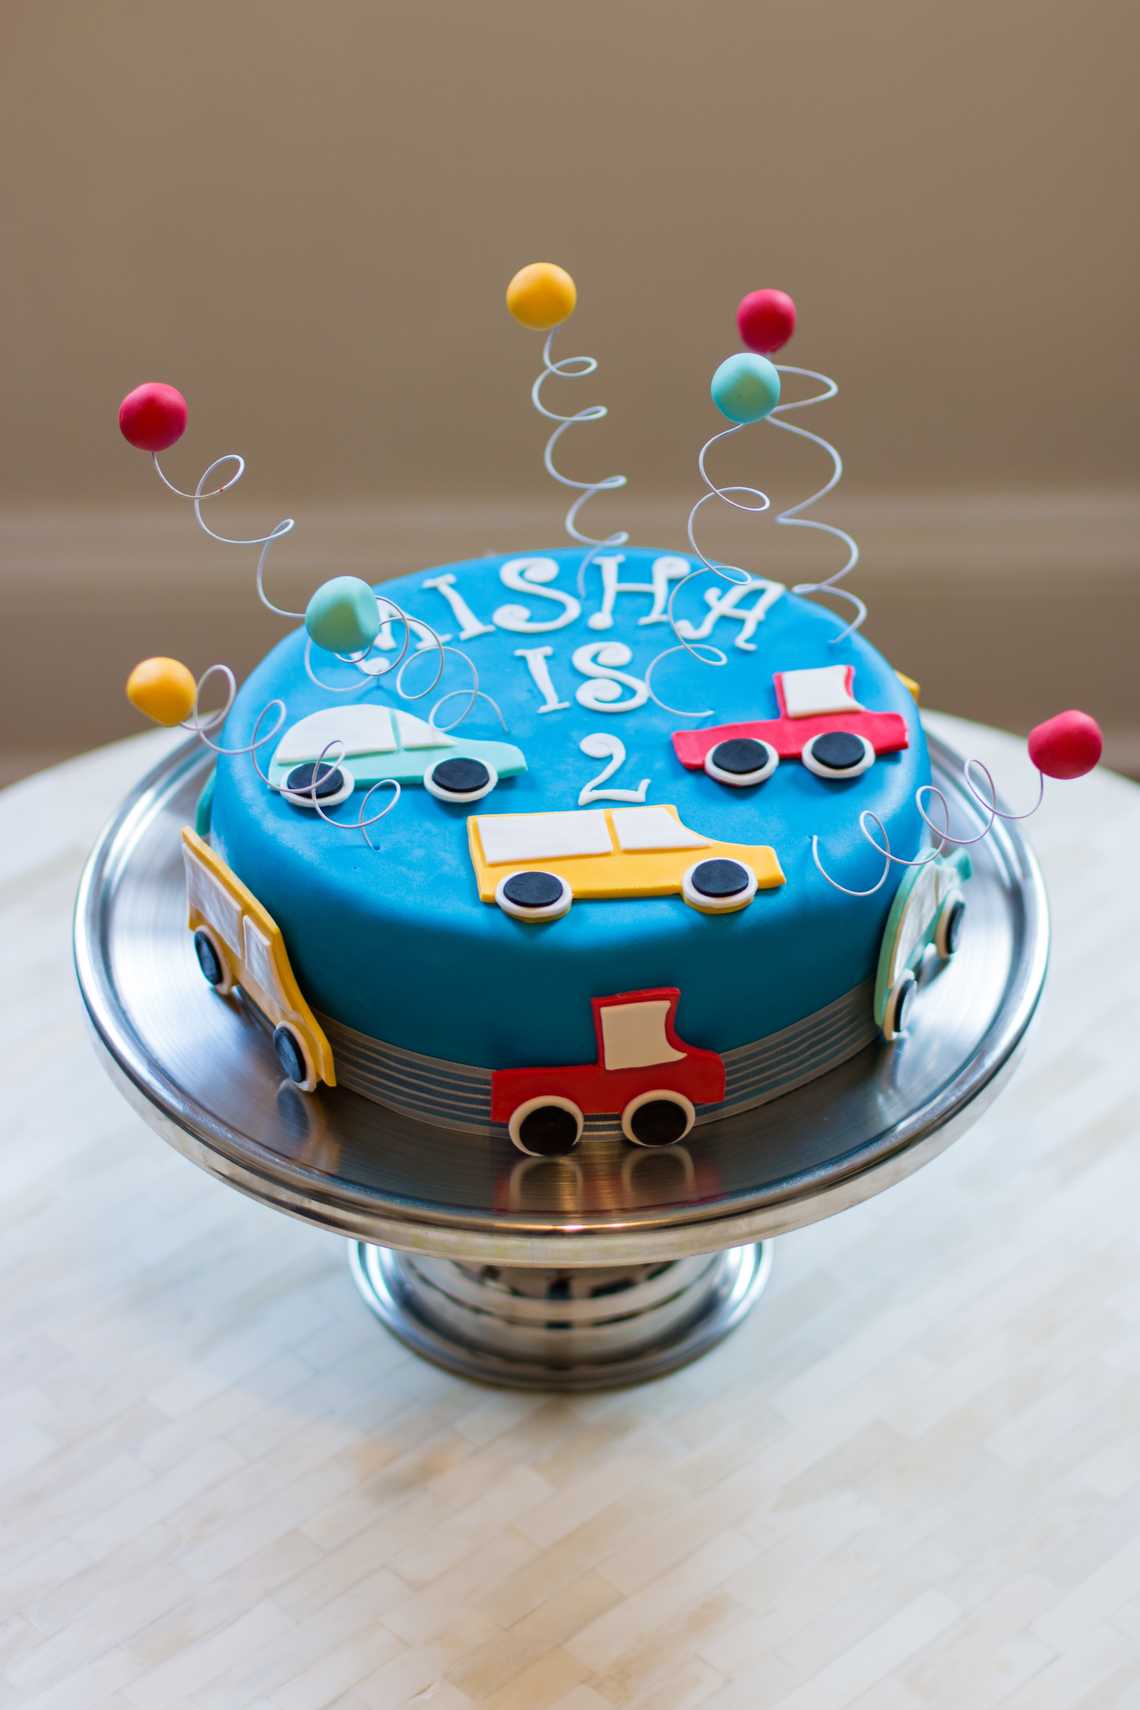 “Misha Is 2” — Cake with Cars — August 1, 2014